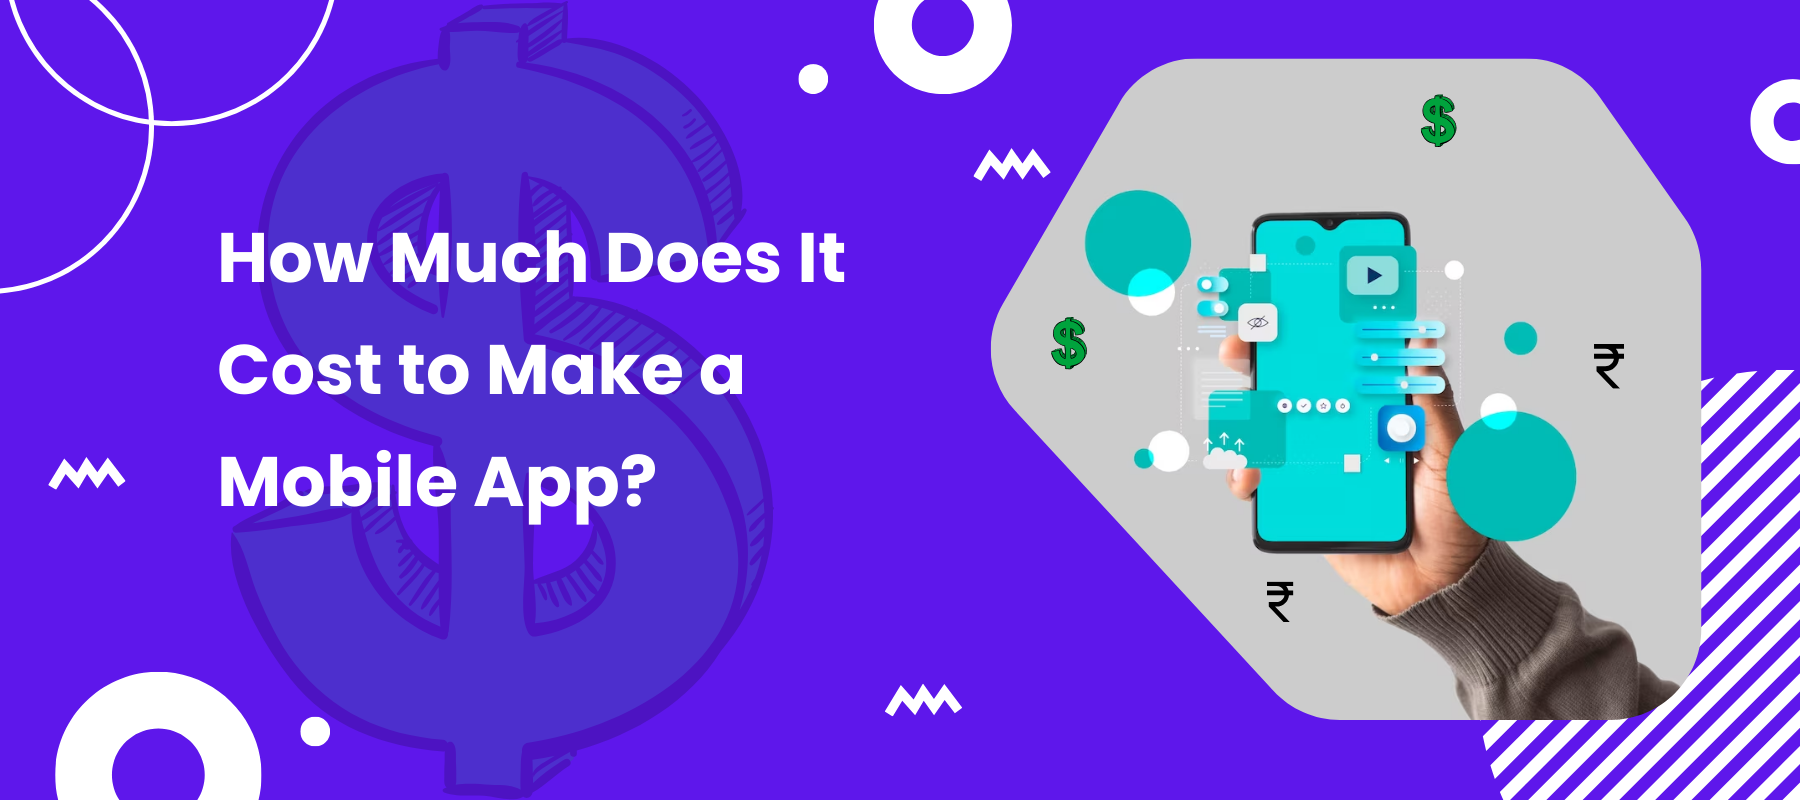 How Much Does It Cost to Make a Mobile App